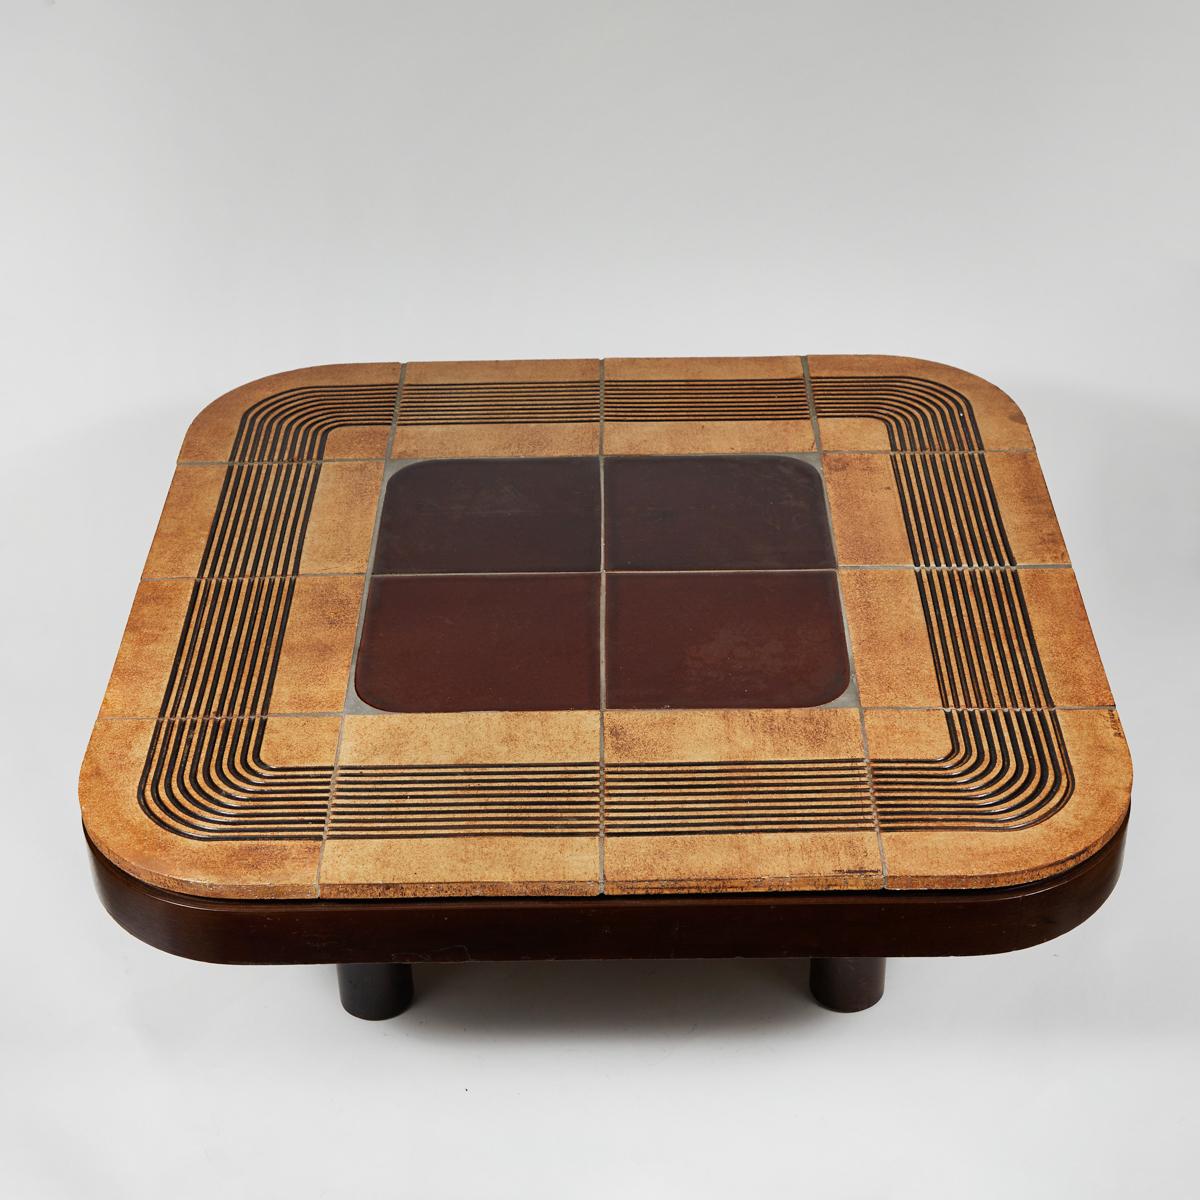 Early 20th Century Mid-Century Modern French Tiled Top Coffee Table by Capron